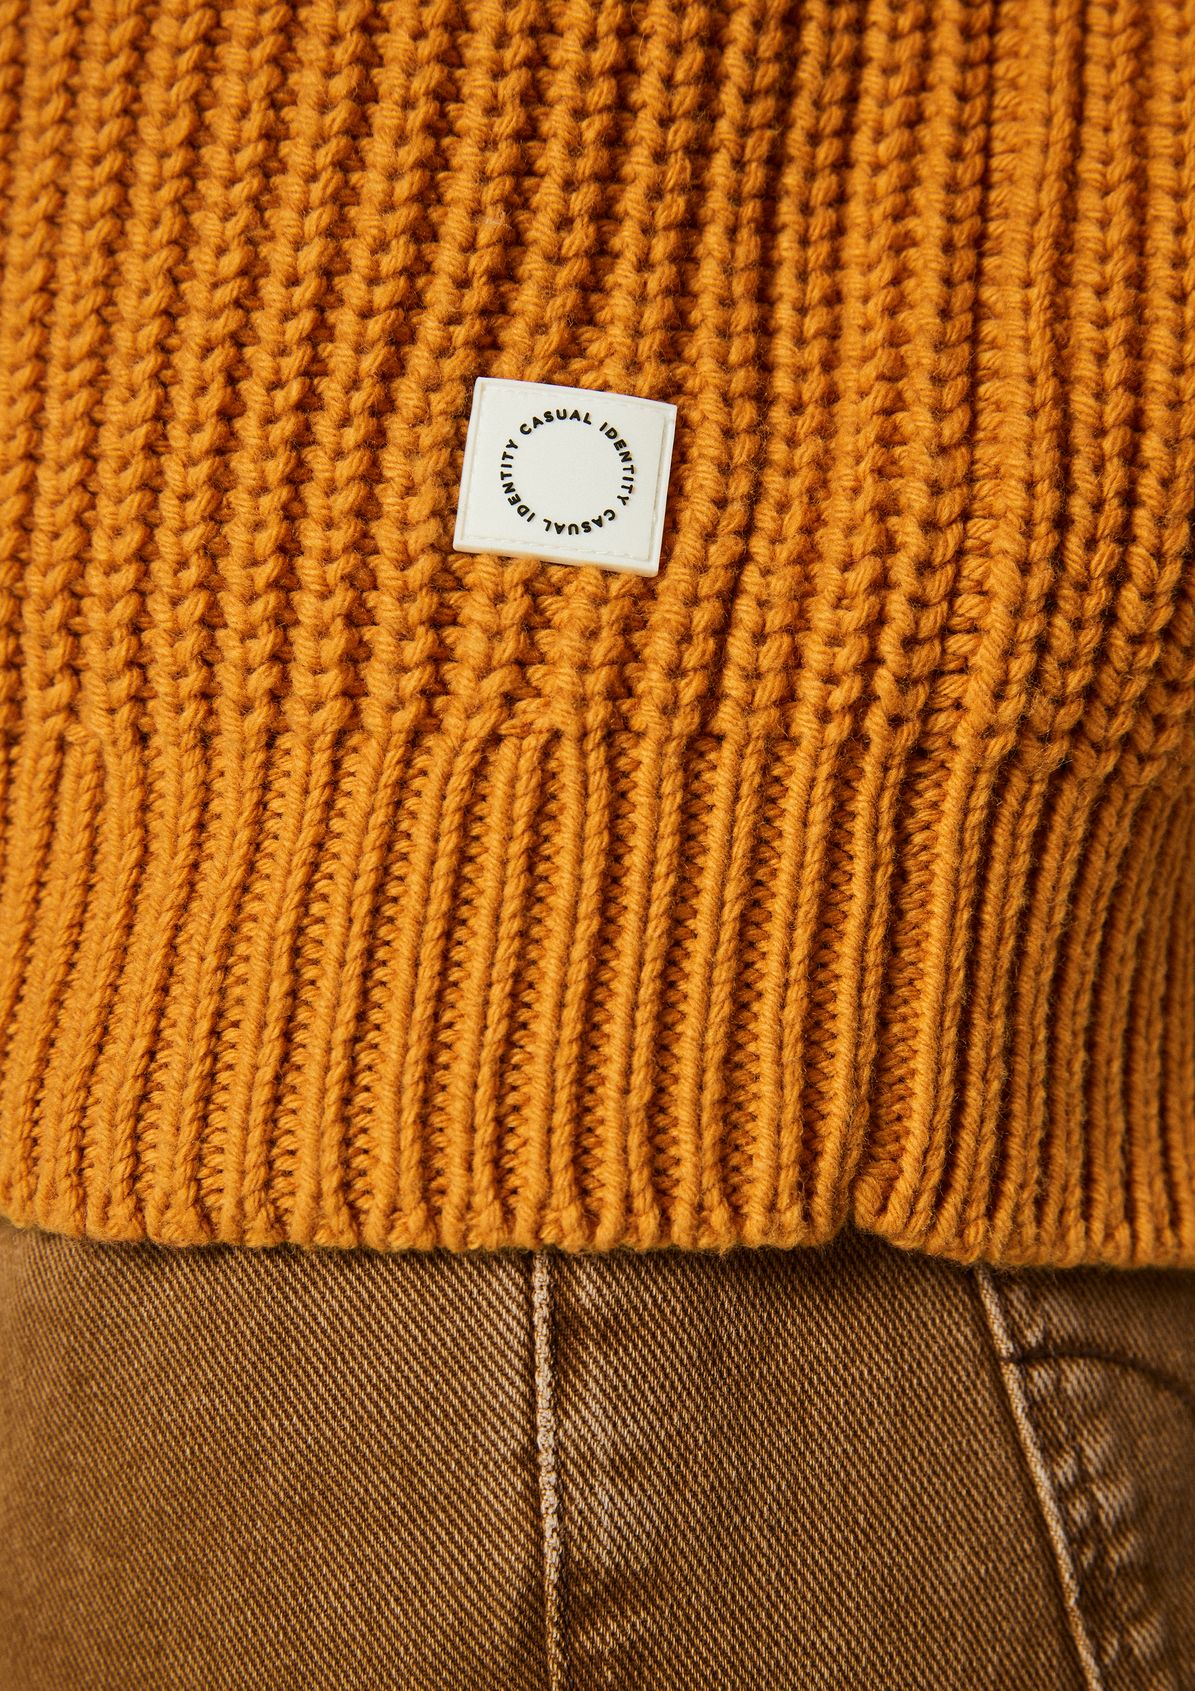 Knit jumper with a percentage of wool from comma